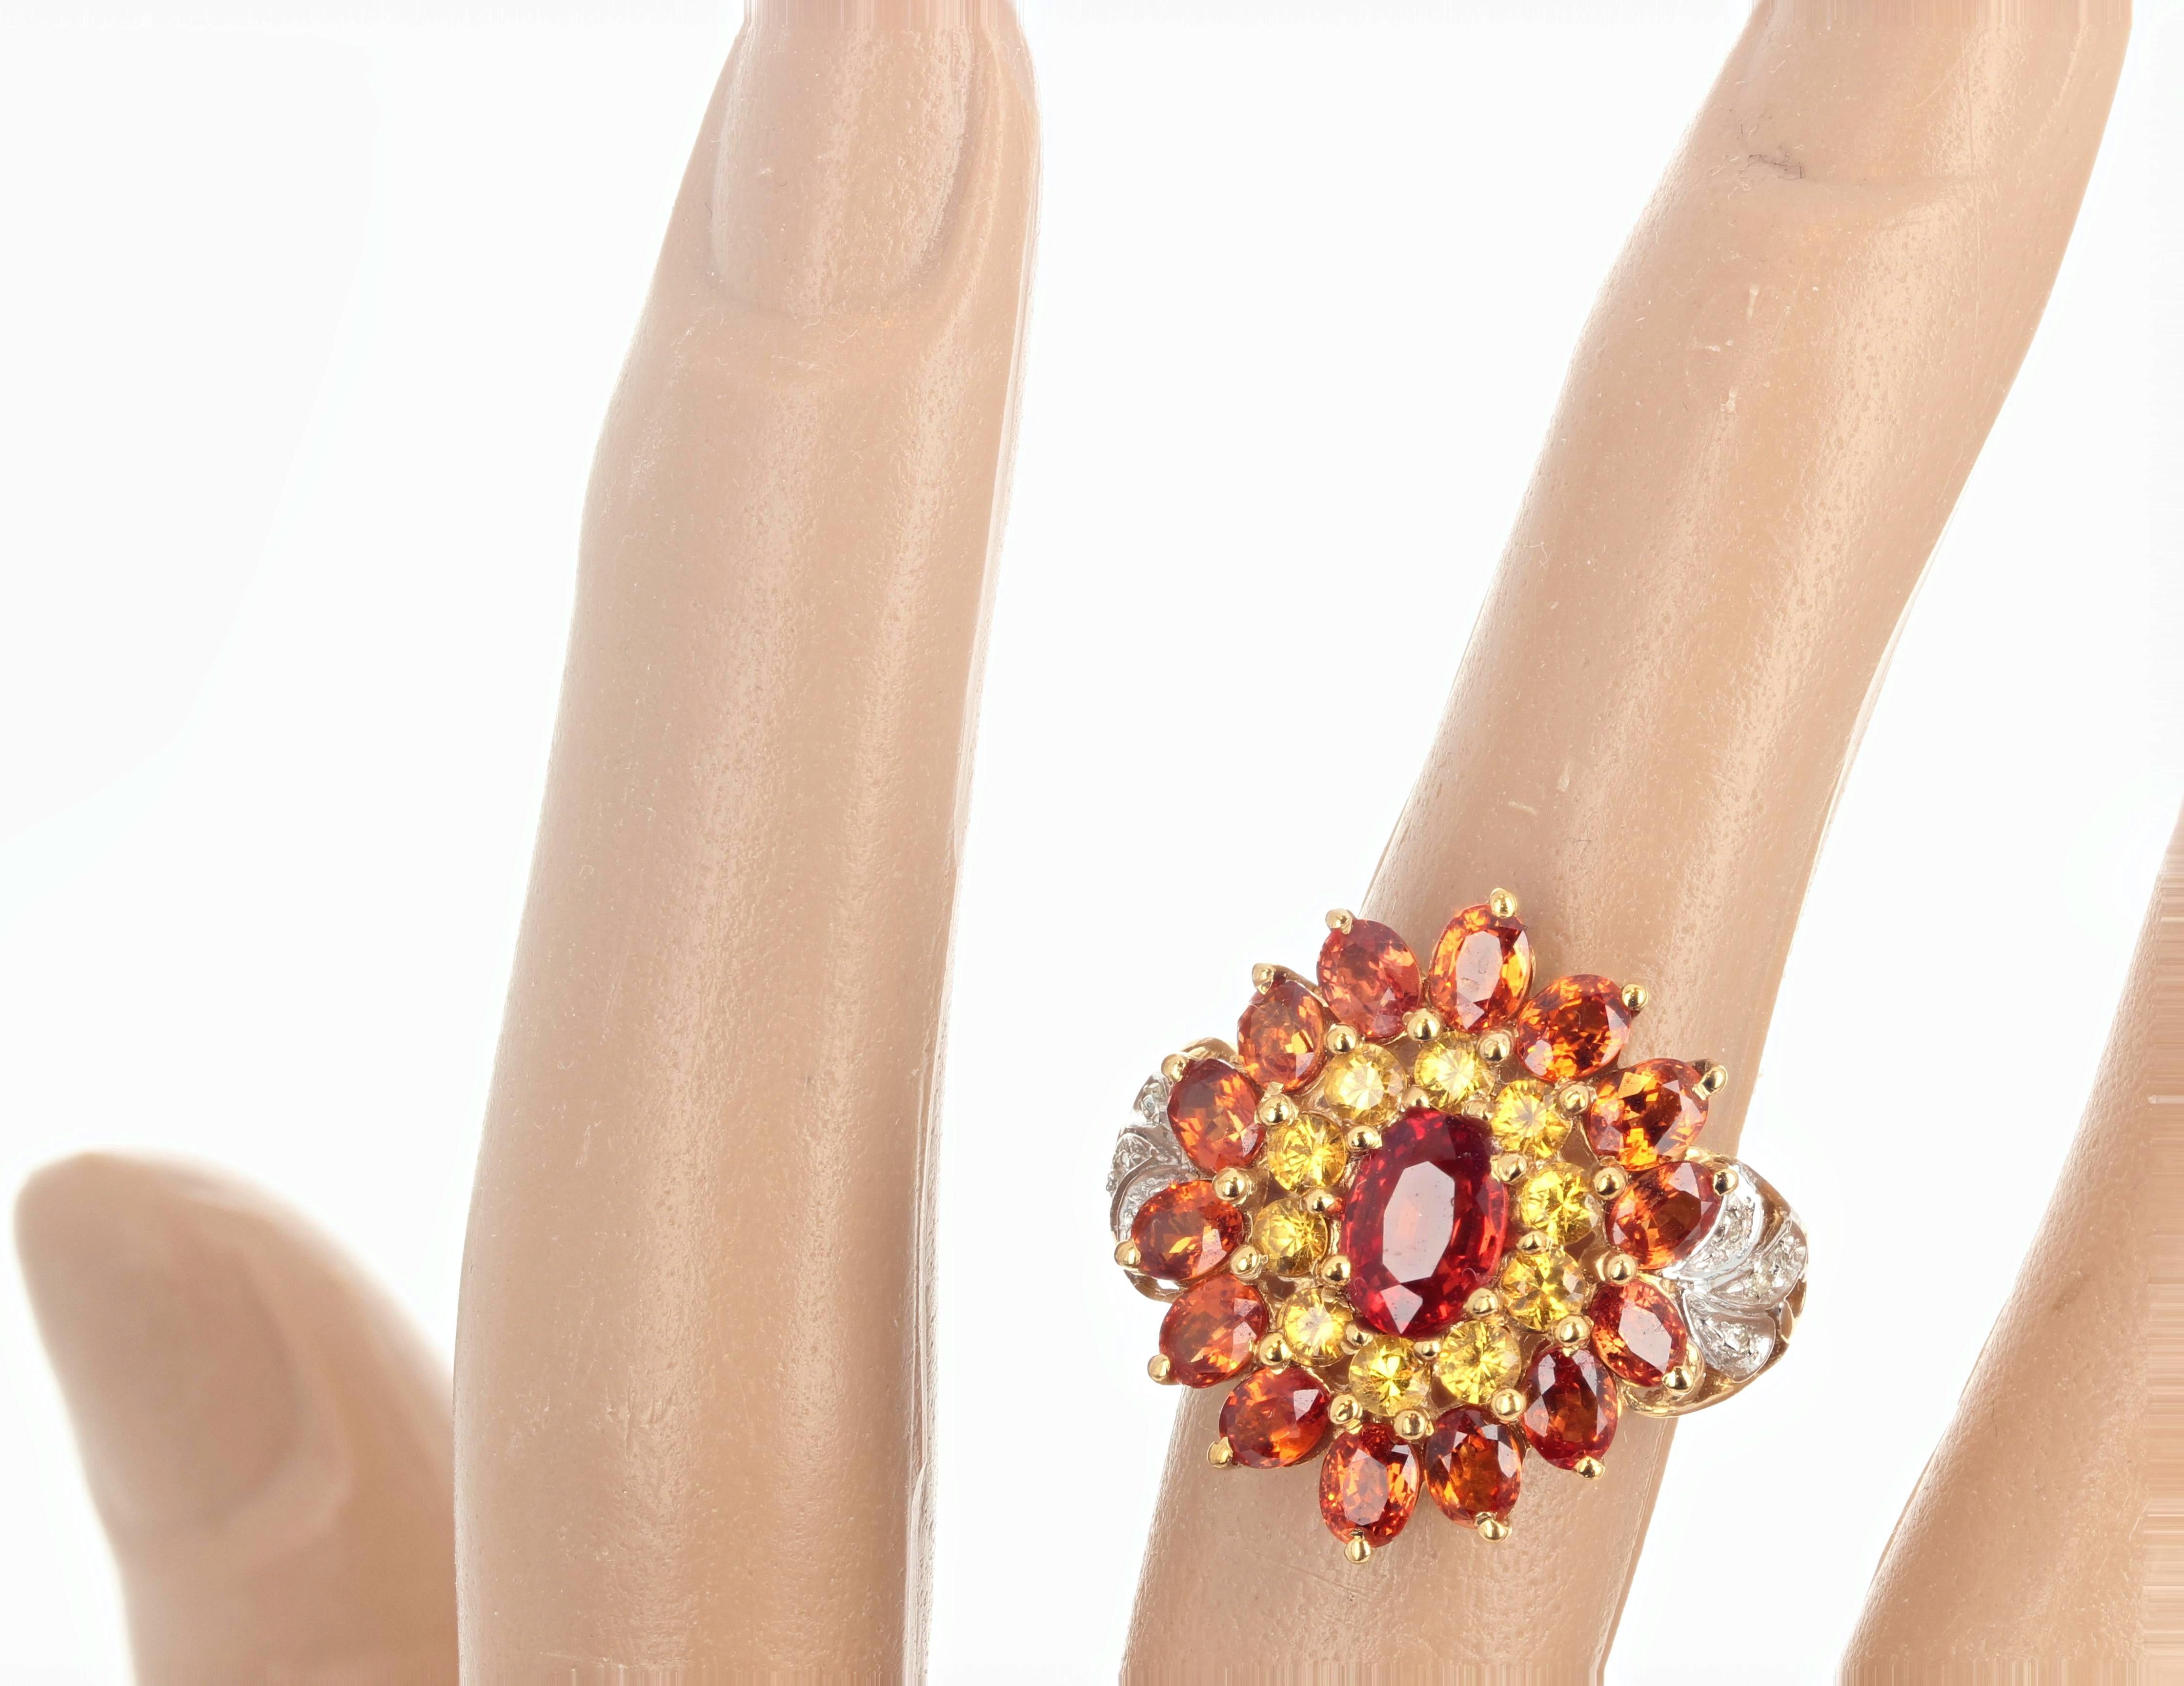 This intensely sparkling brilliant orangy red Citrine (largest one is 1.35 carats) is surrounded by little round yellow citrines (approximately 1/4 carat each) and oval glittering orangy yellow citrines (approximately 1/3 carat each) all enhanced by